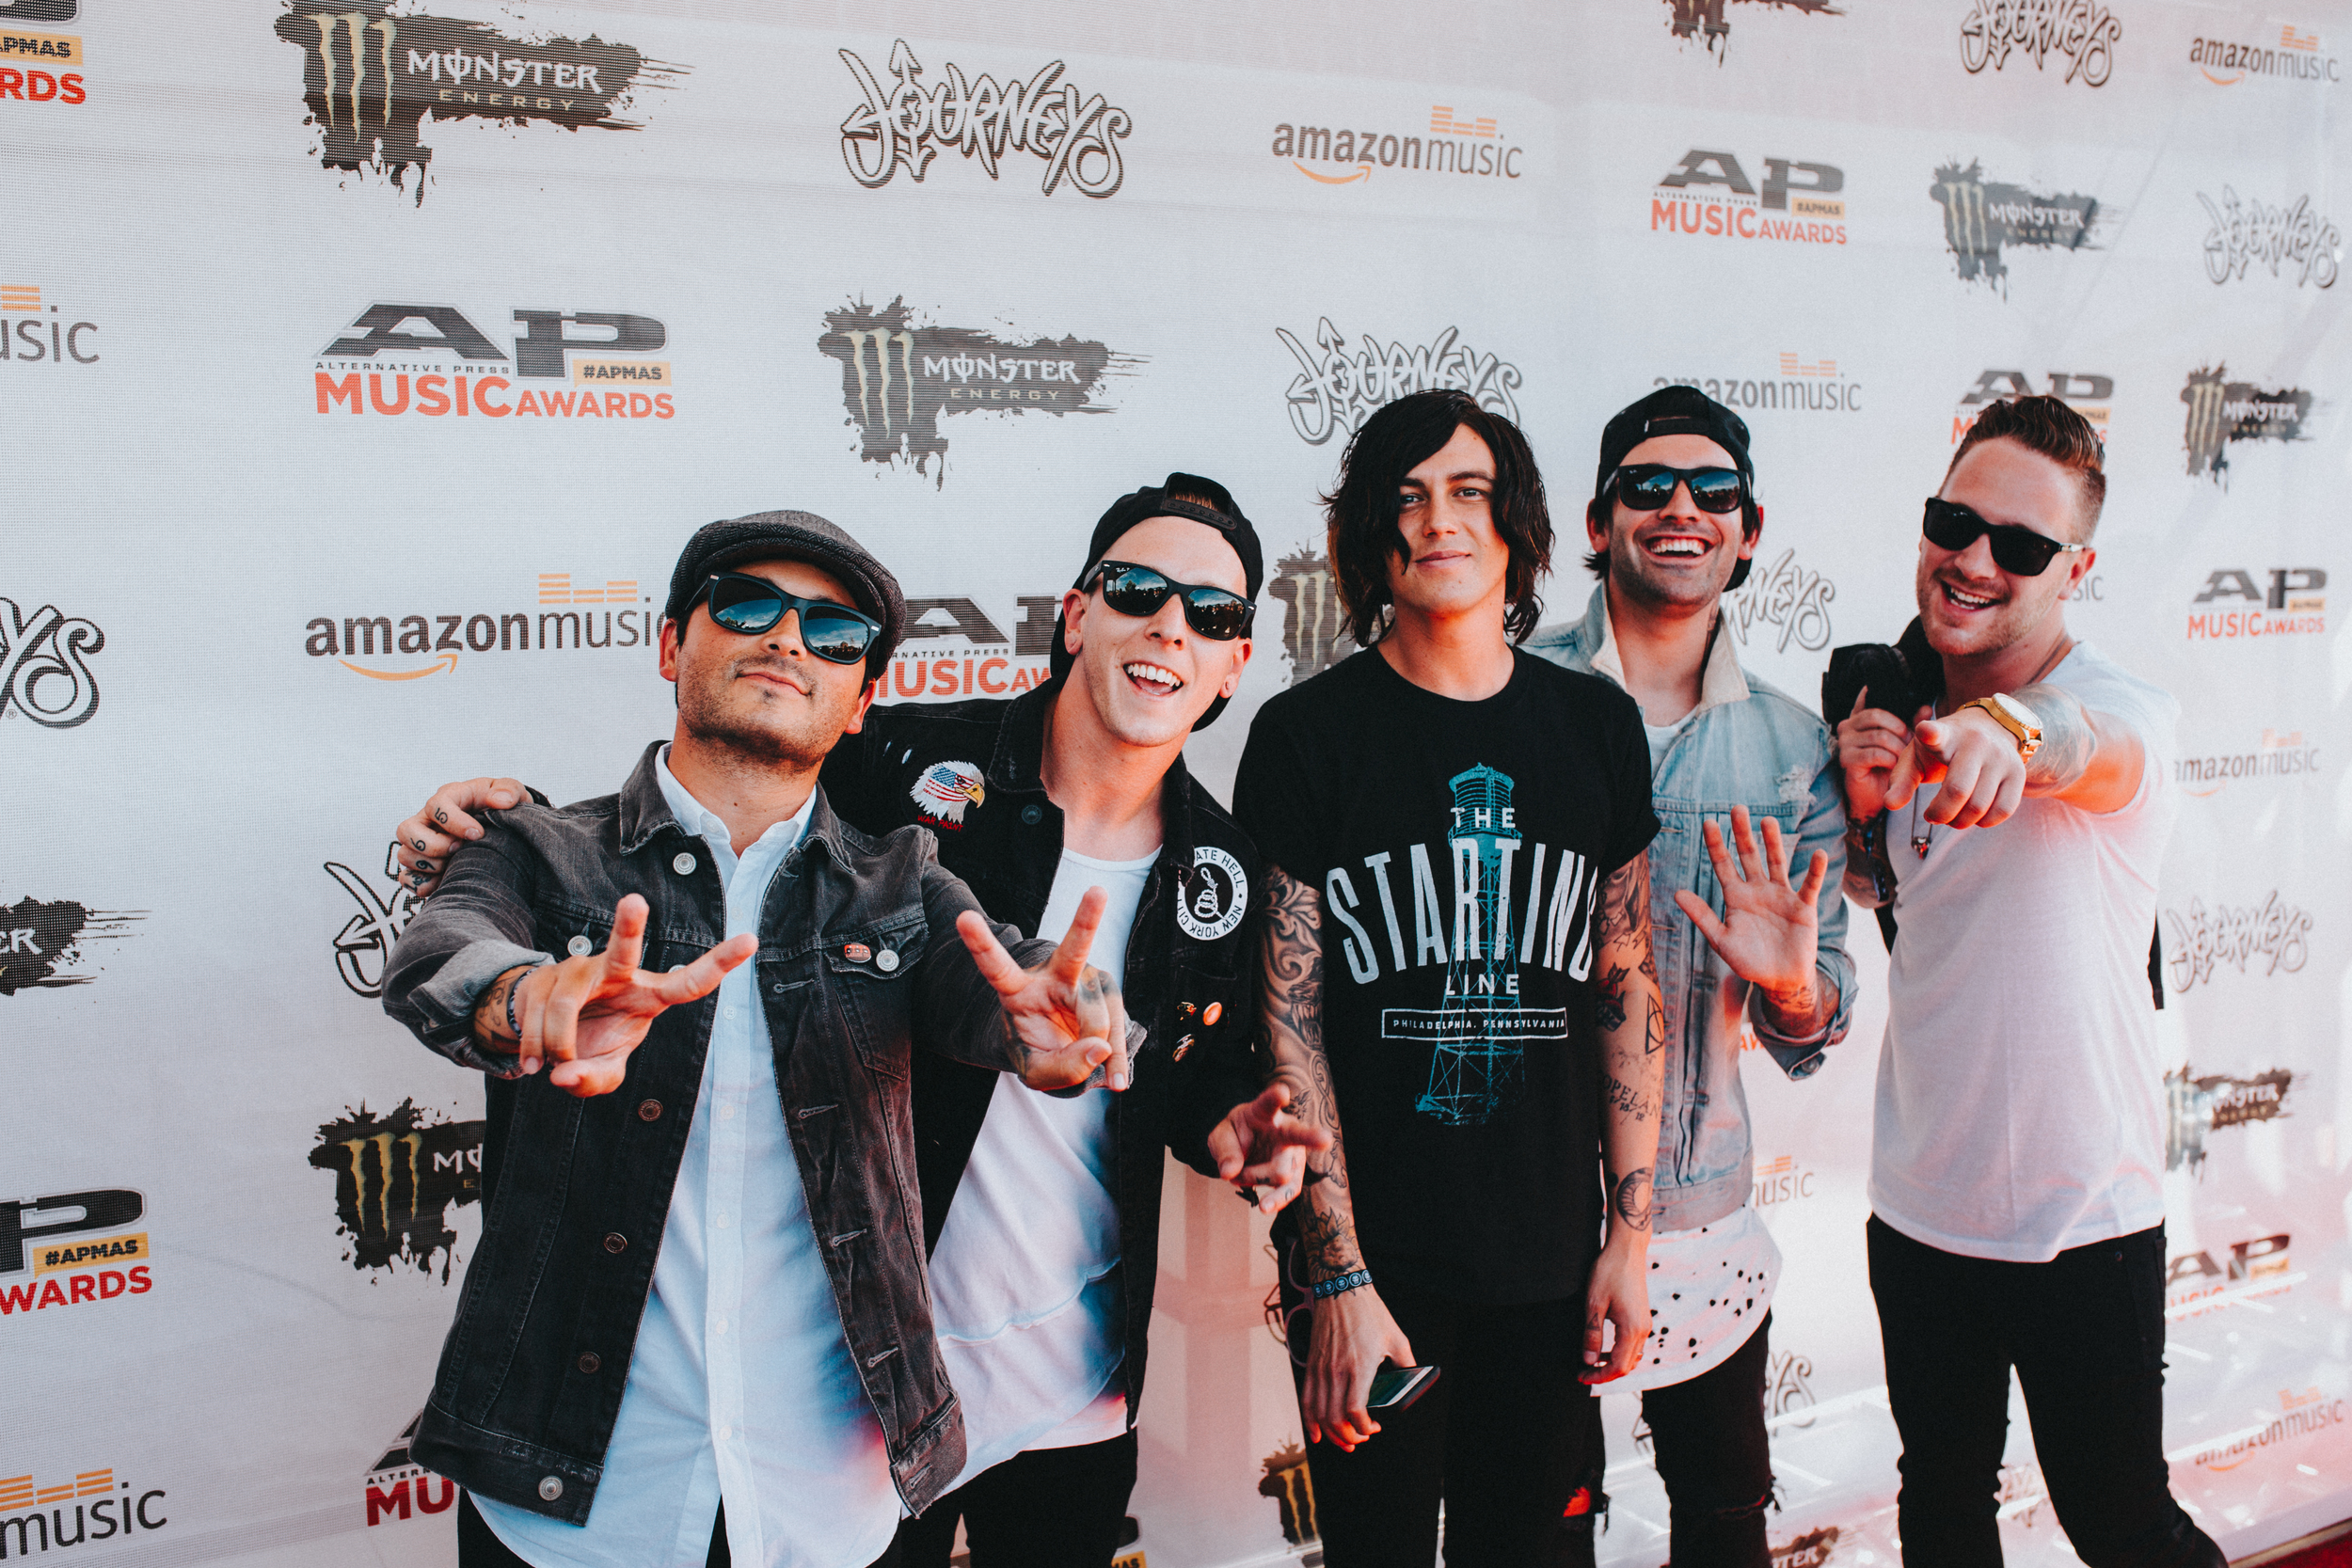   APMA's.&nbsp; This was my  first time on a red carpet.  I was wedged between like 20 other photographers in a very short strip but when Sleeping With Sirens walked on, they saw me and started yelling saying, "That's our guy!".  They've also nicknam